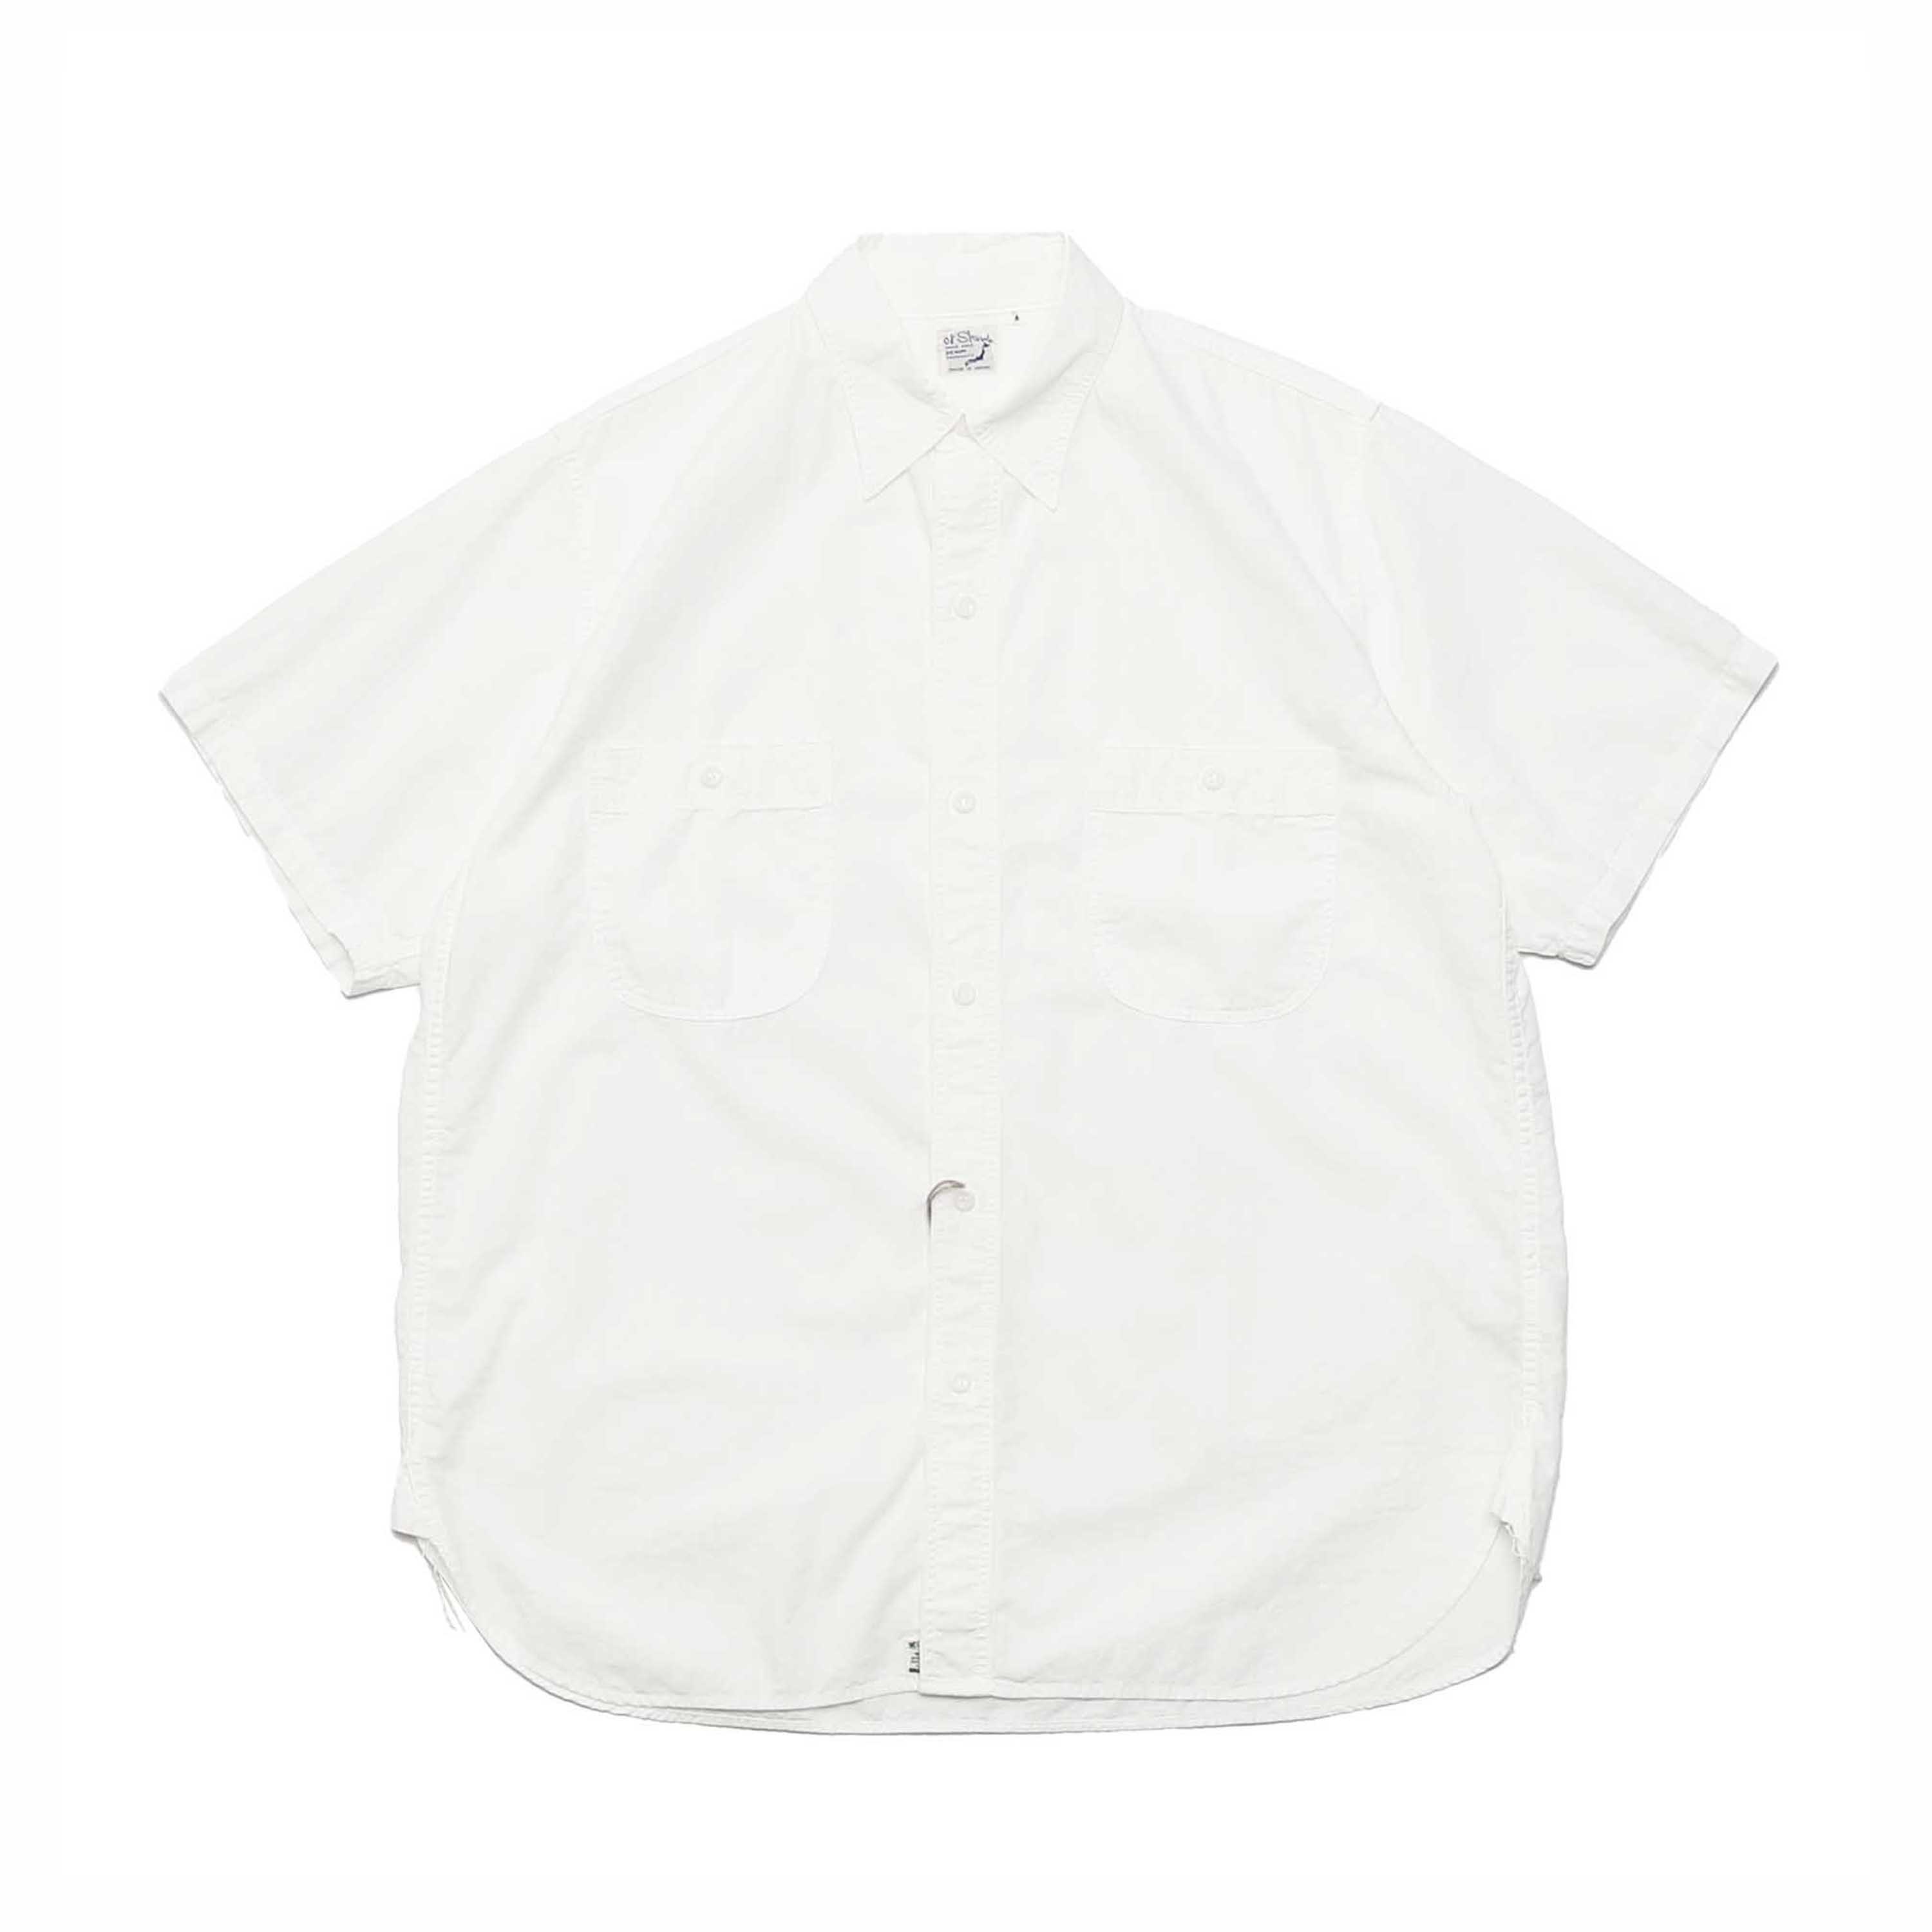 VINTAGE FIT S/S CHAMBRAY WORK SHIRTS - WHITE CHAMBRAY